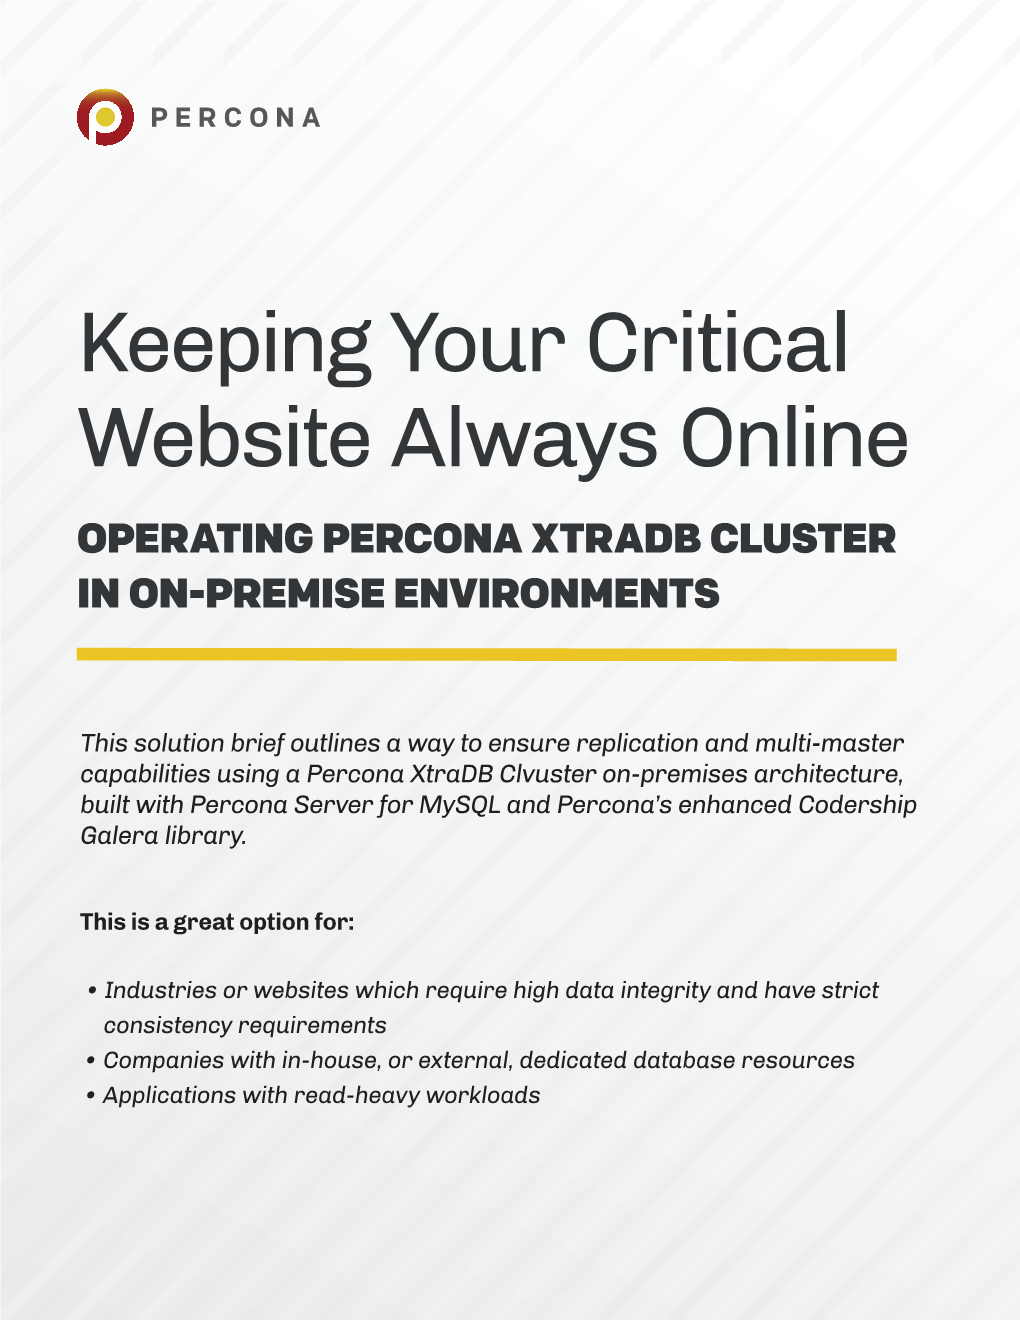 Keeping Your Critical Website Always Online OPERATING PERCONA XTRADB CLUSTER in ON-PREMISE ENVIRONMENTS